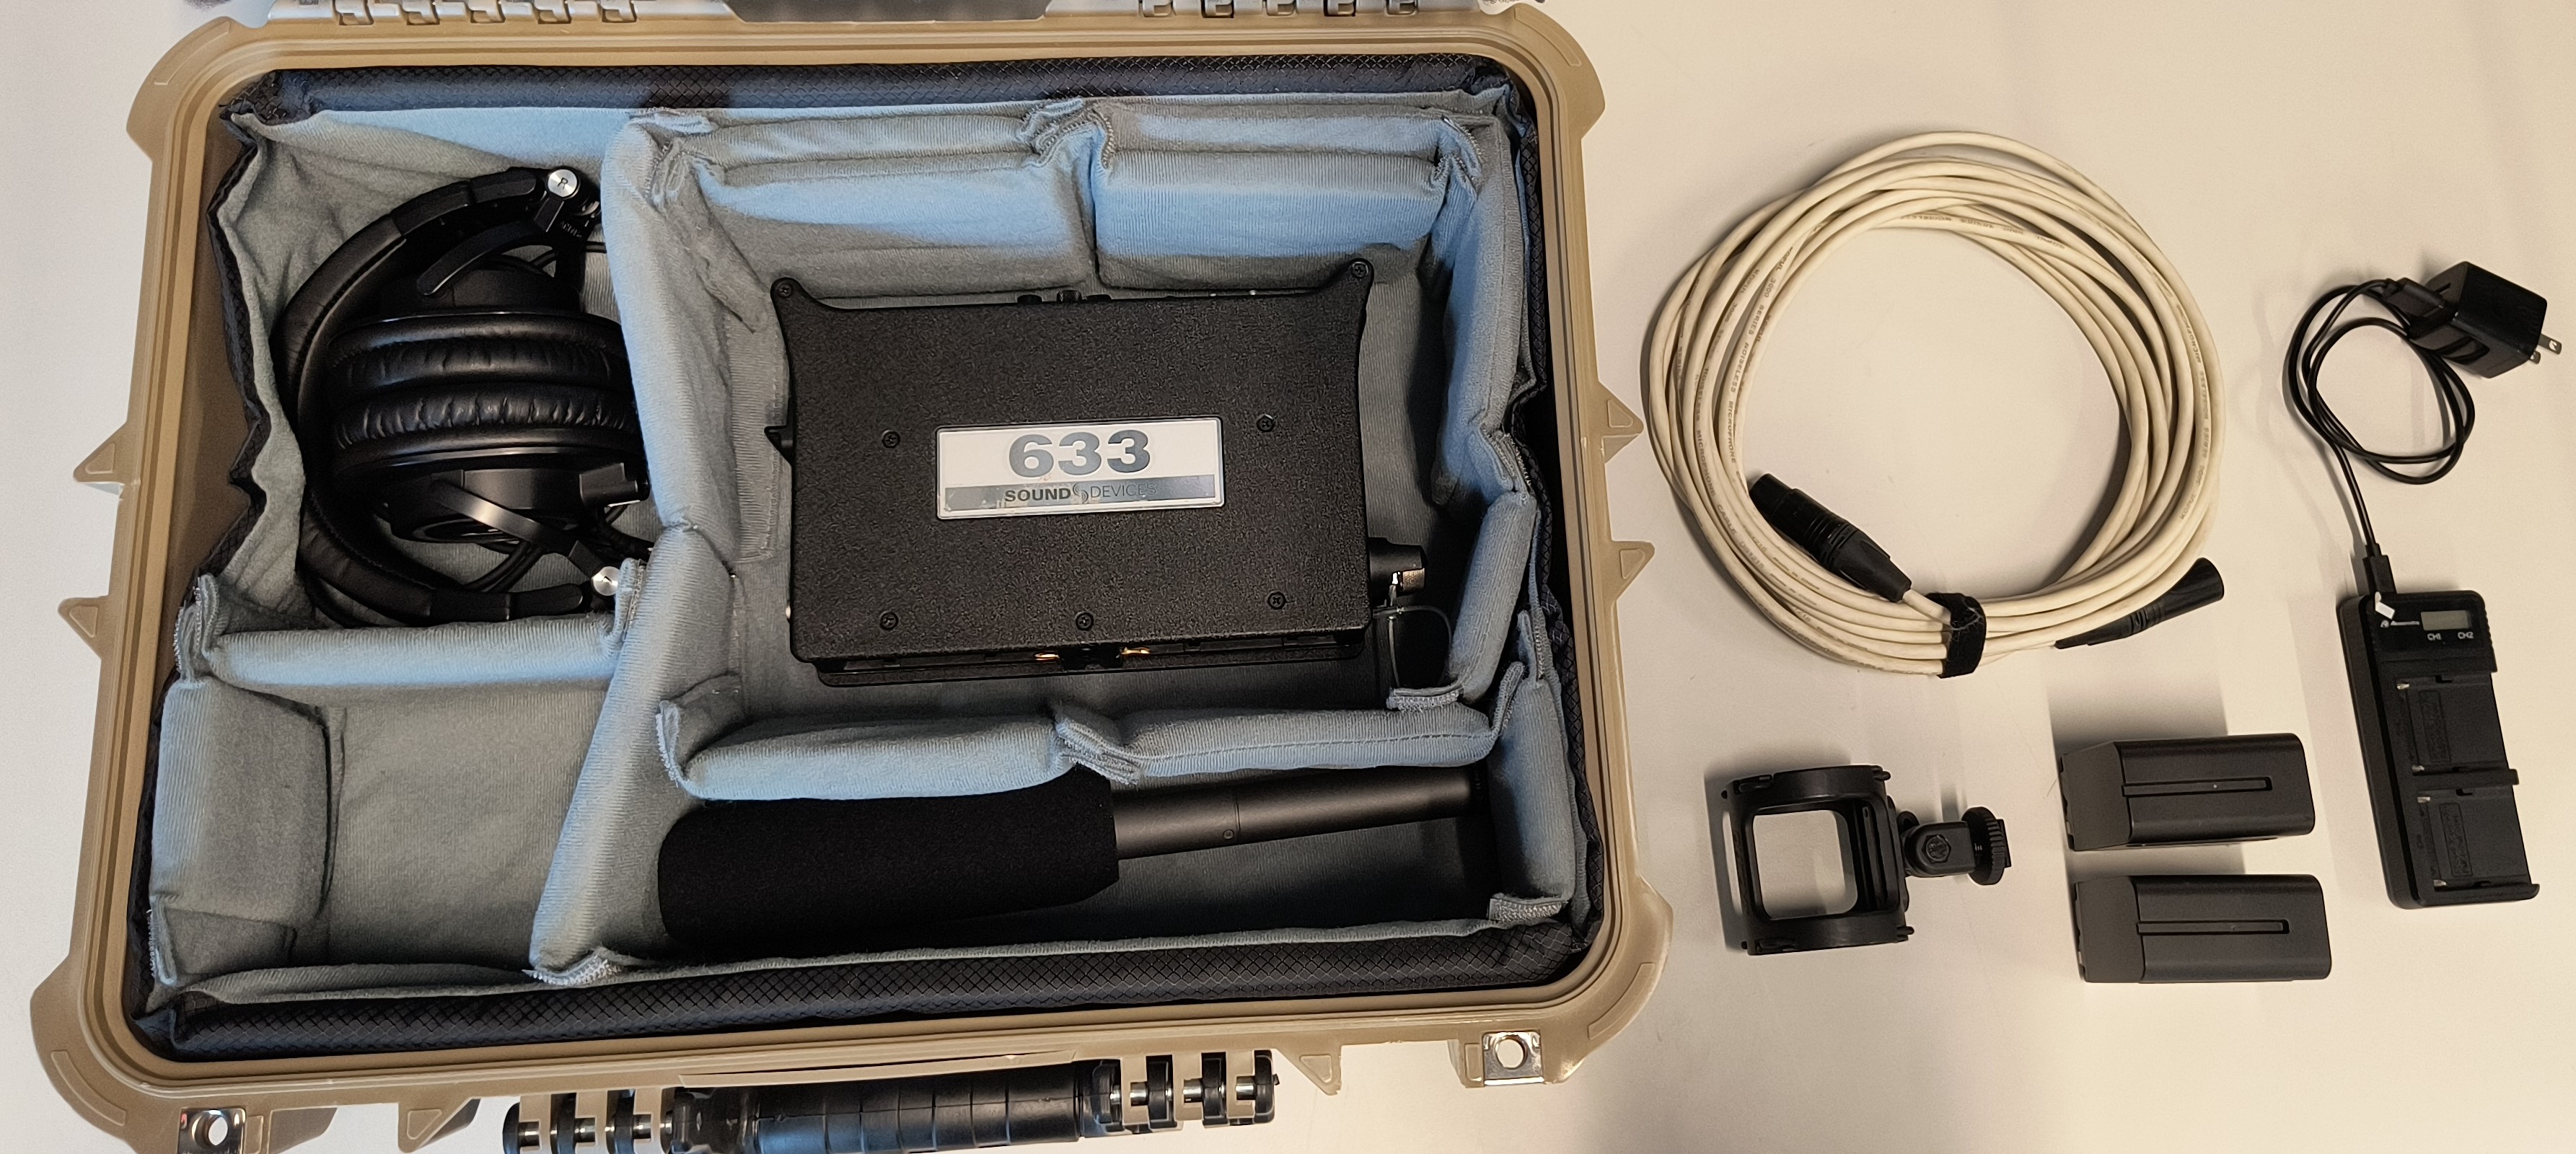 Sound Devices 633: